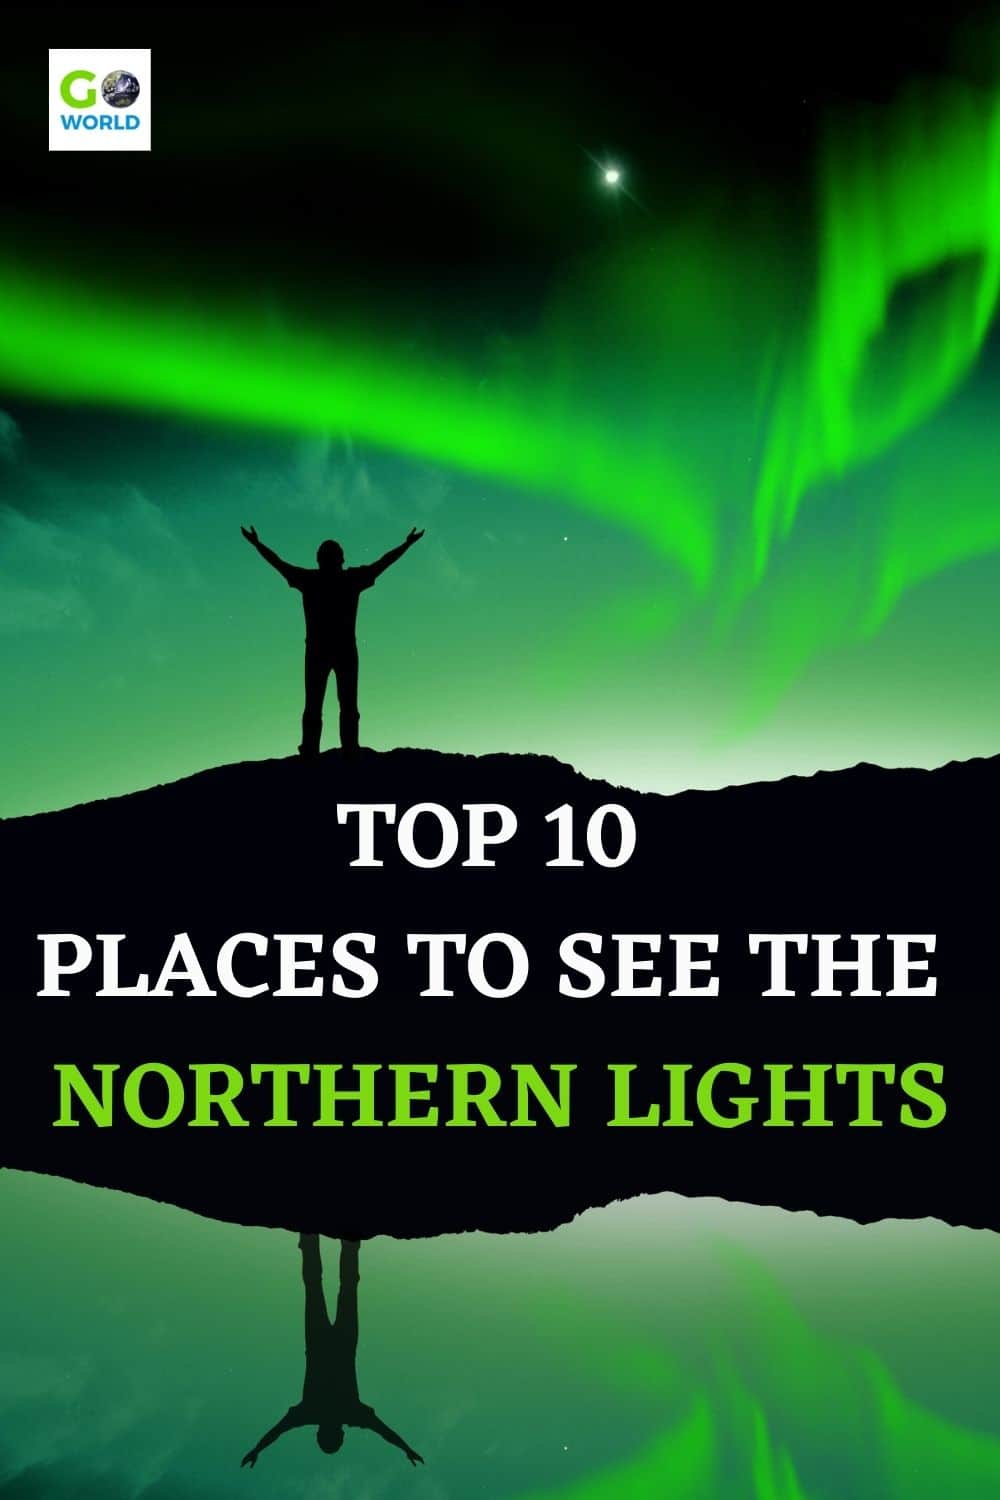 If you want to see the Northern Lights check out this article for the top 10 places in the world to view the spectacular Aurora Borealis. #northernlights #auroraborealis